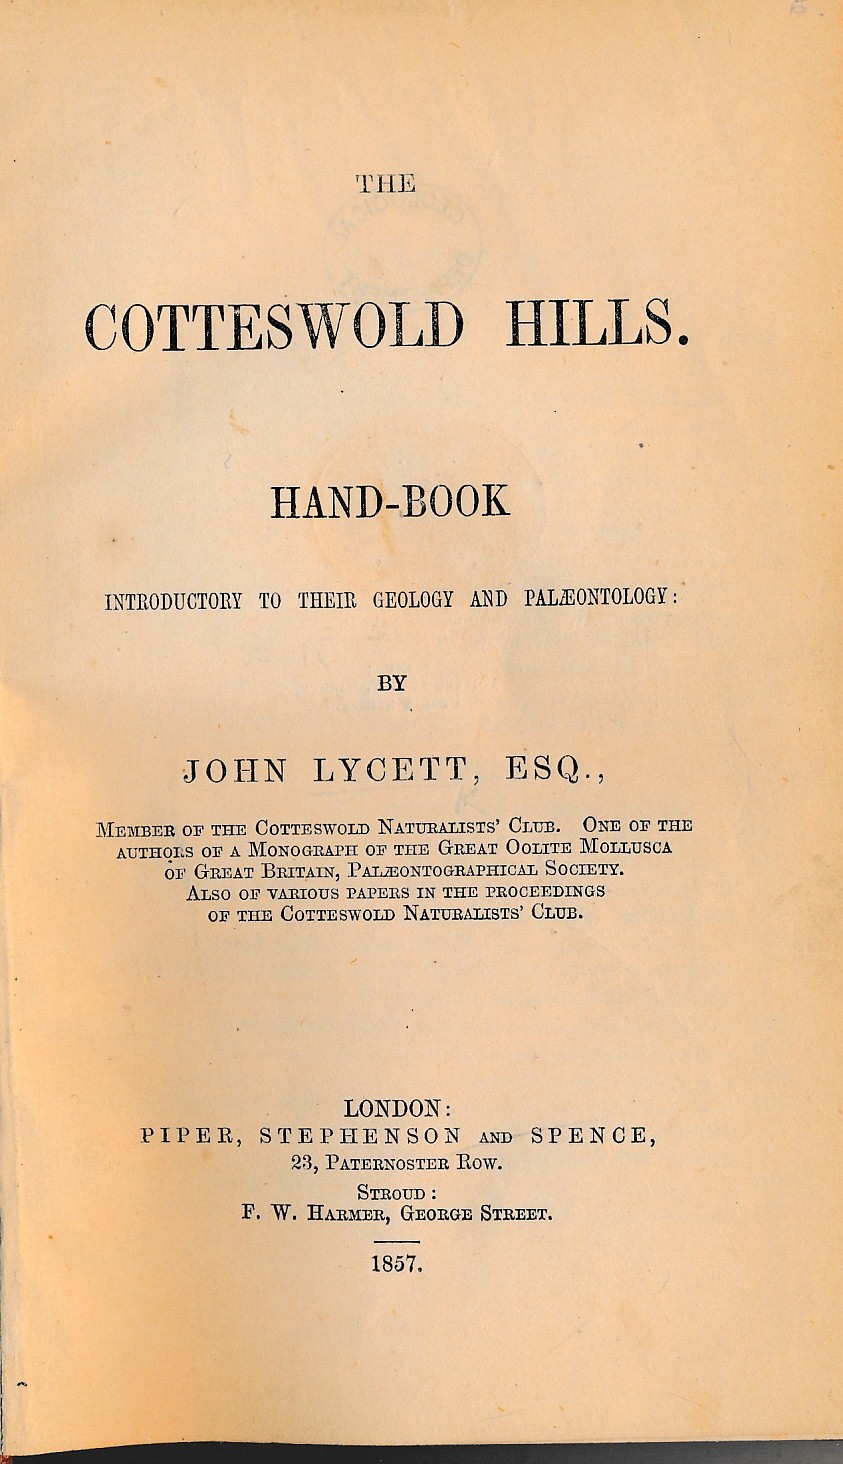 The Cotteswold Hills. Hand-Book Introductory to their Geology and Palaeontology.